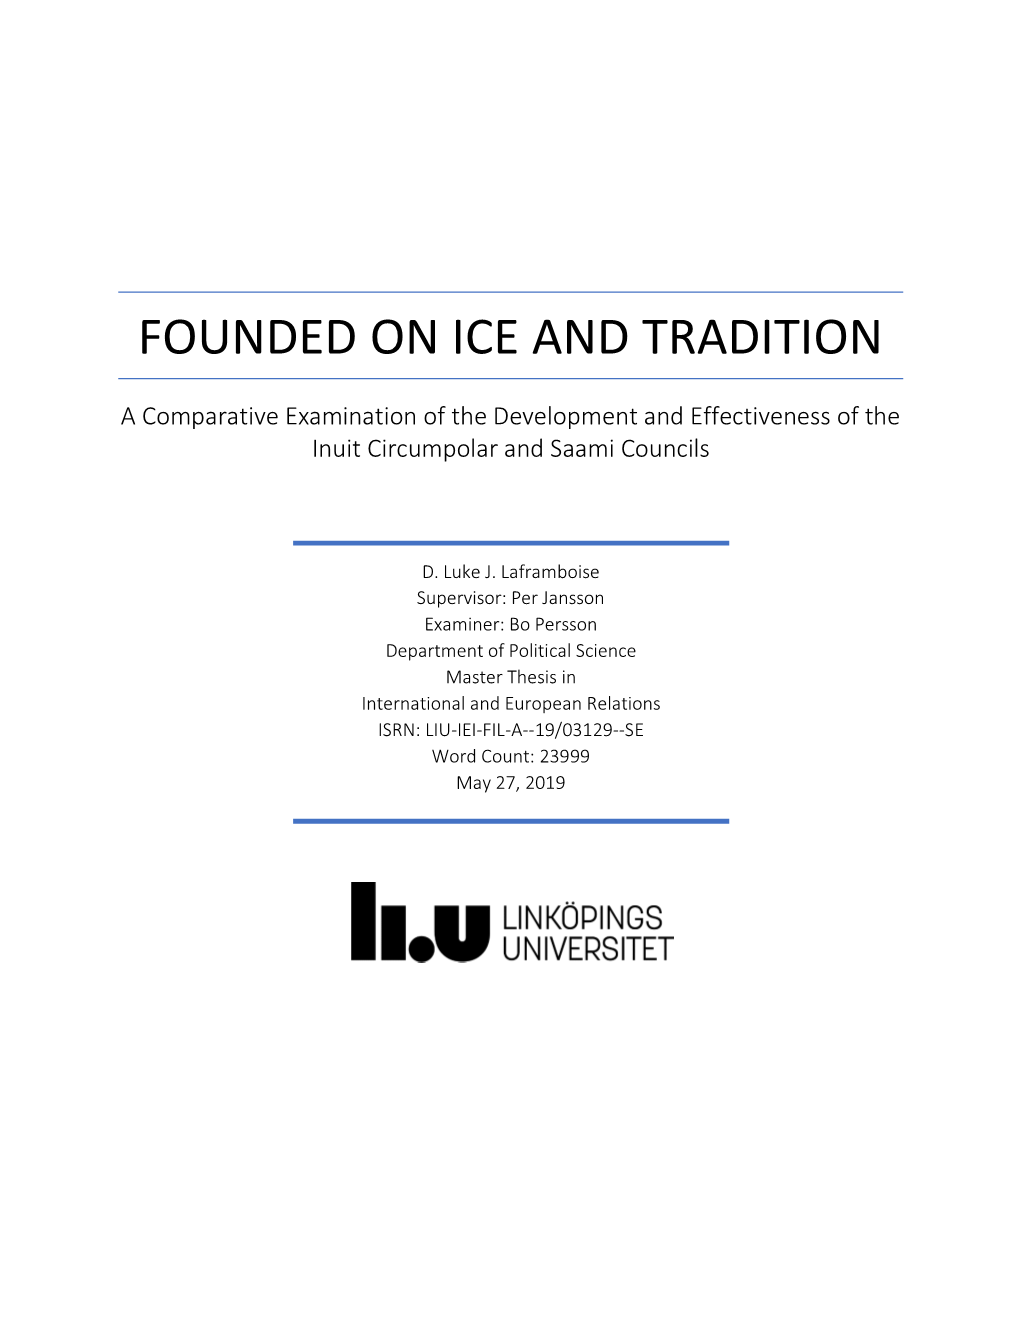 Founded on Ice and Tradition